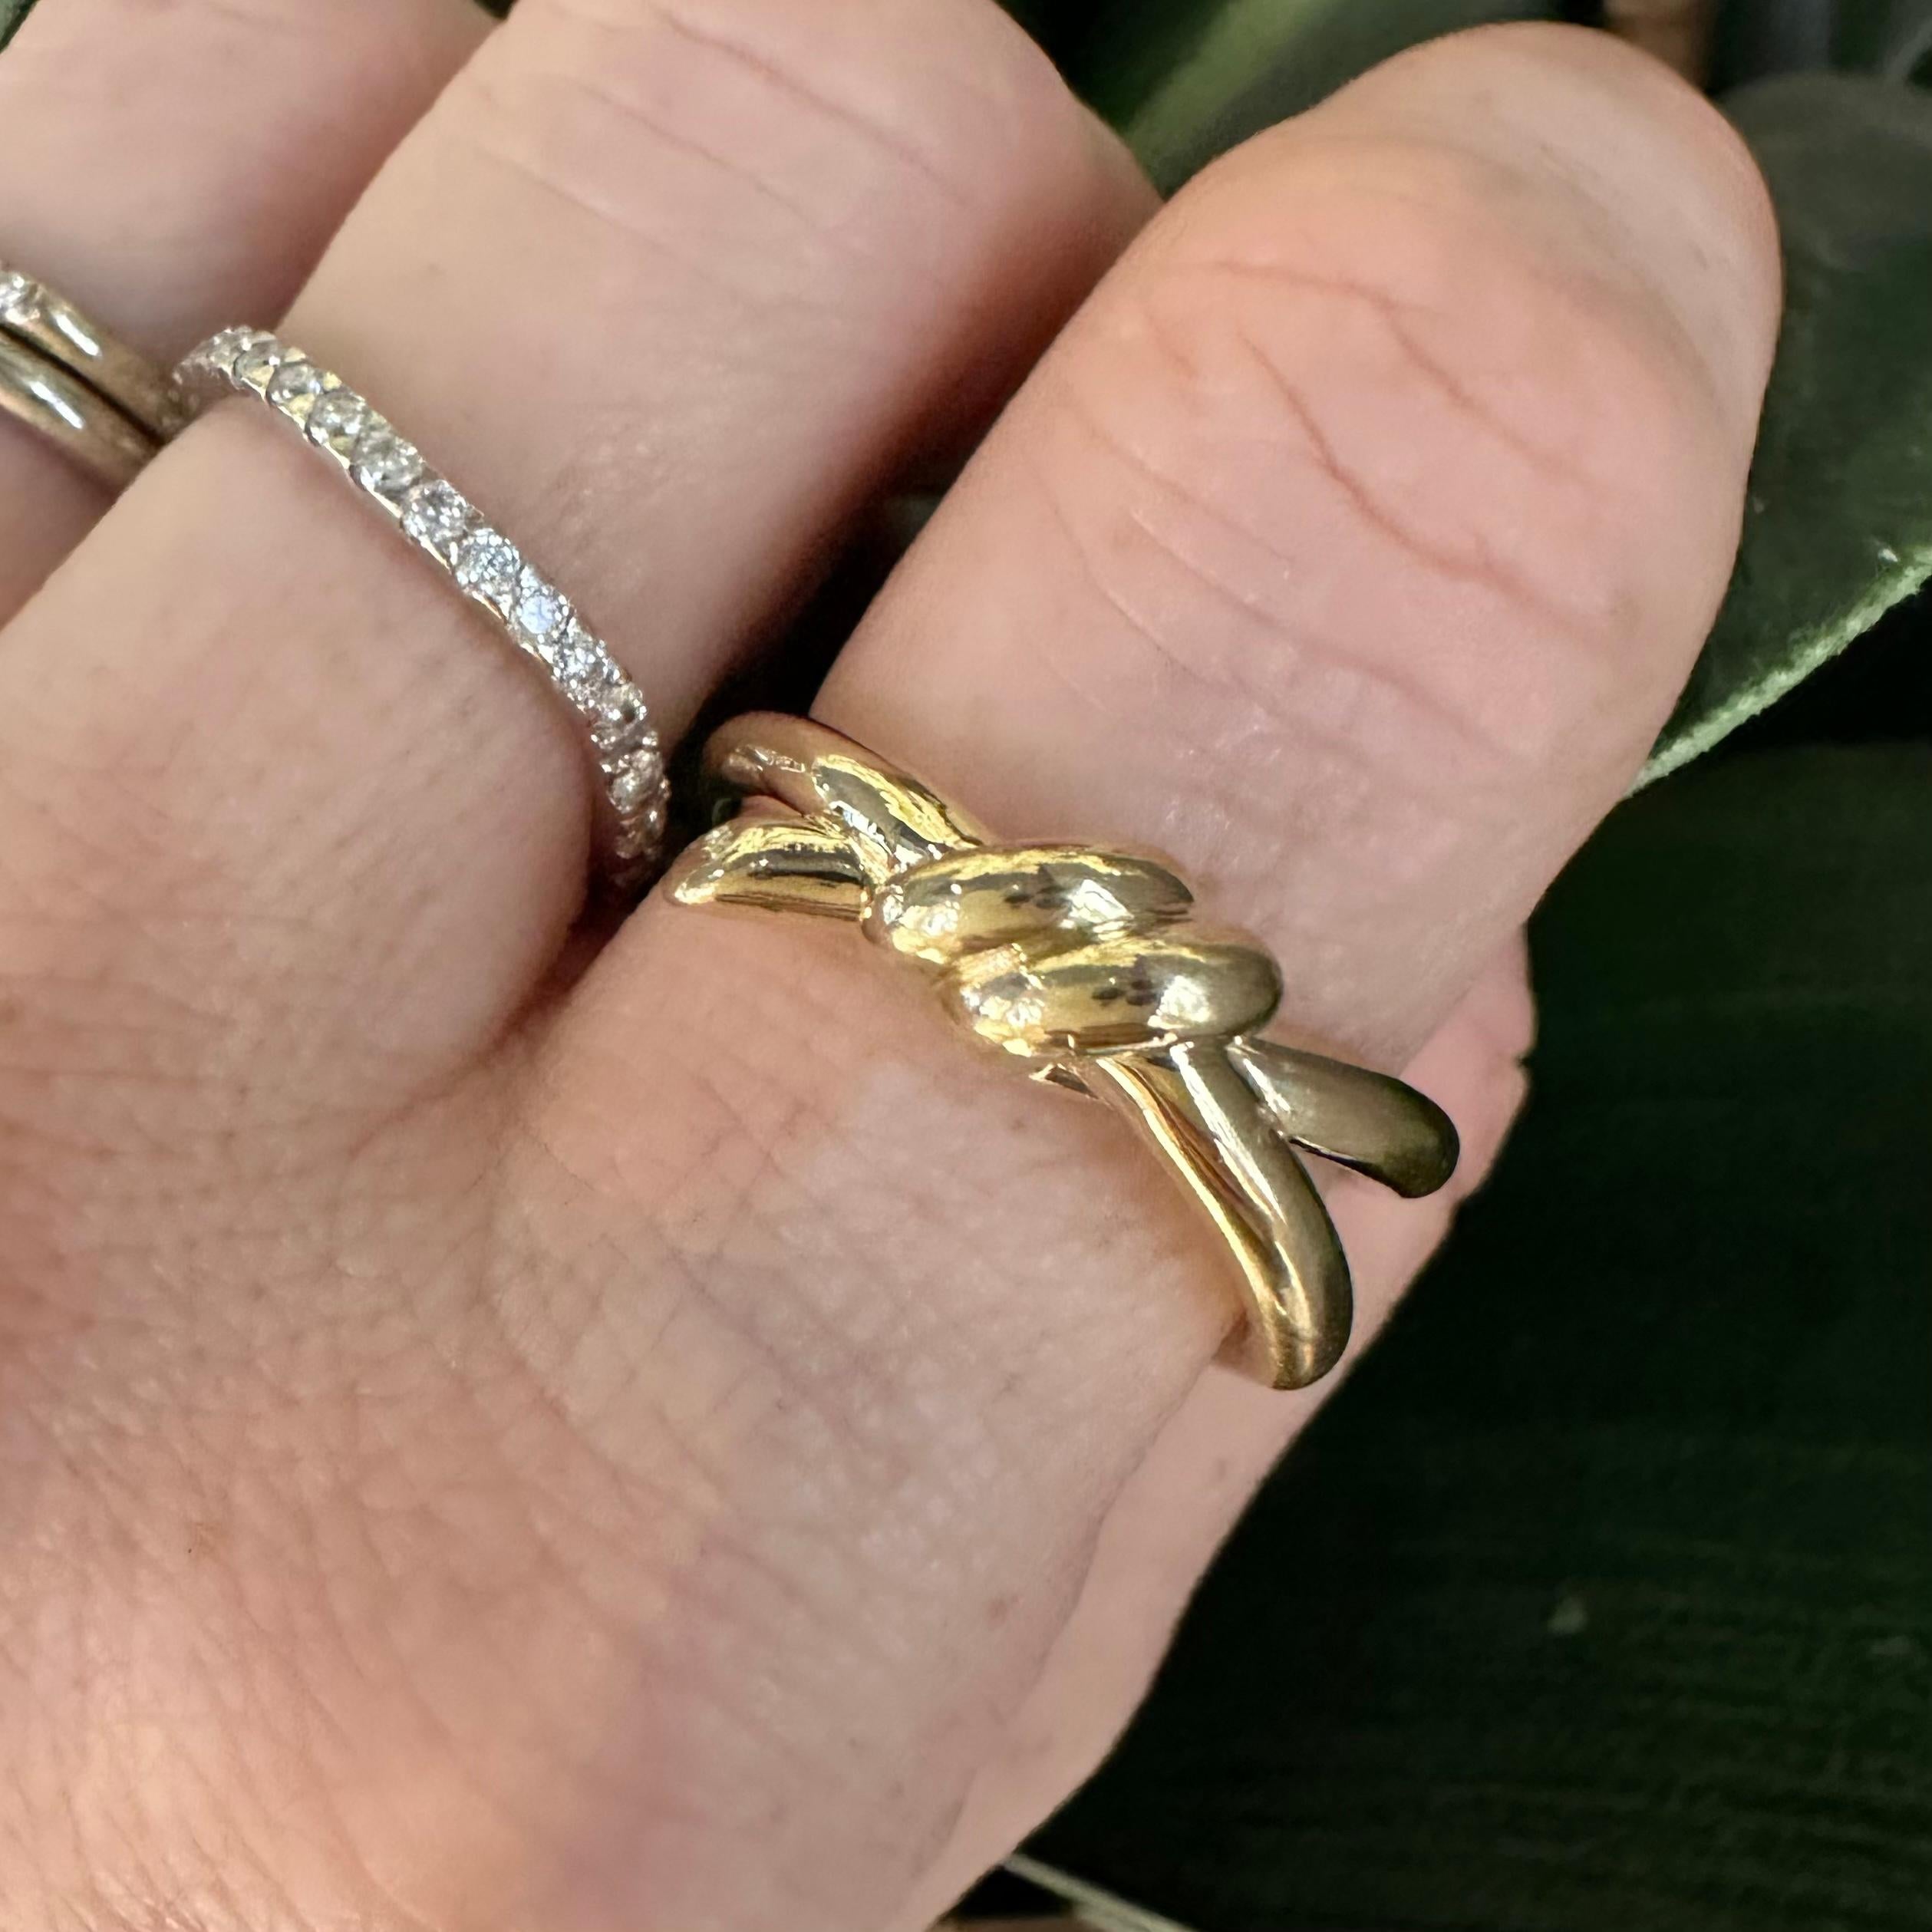 Tiffany & Co. Tiffany Knot 18k Yellow Gold Ring, Size 8 In Excellent Condition For Sale In Miami, FL